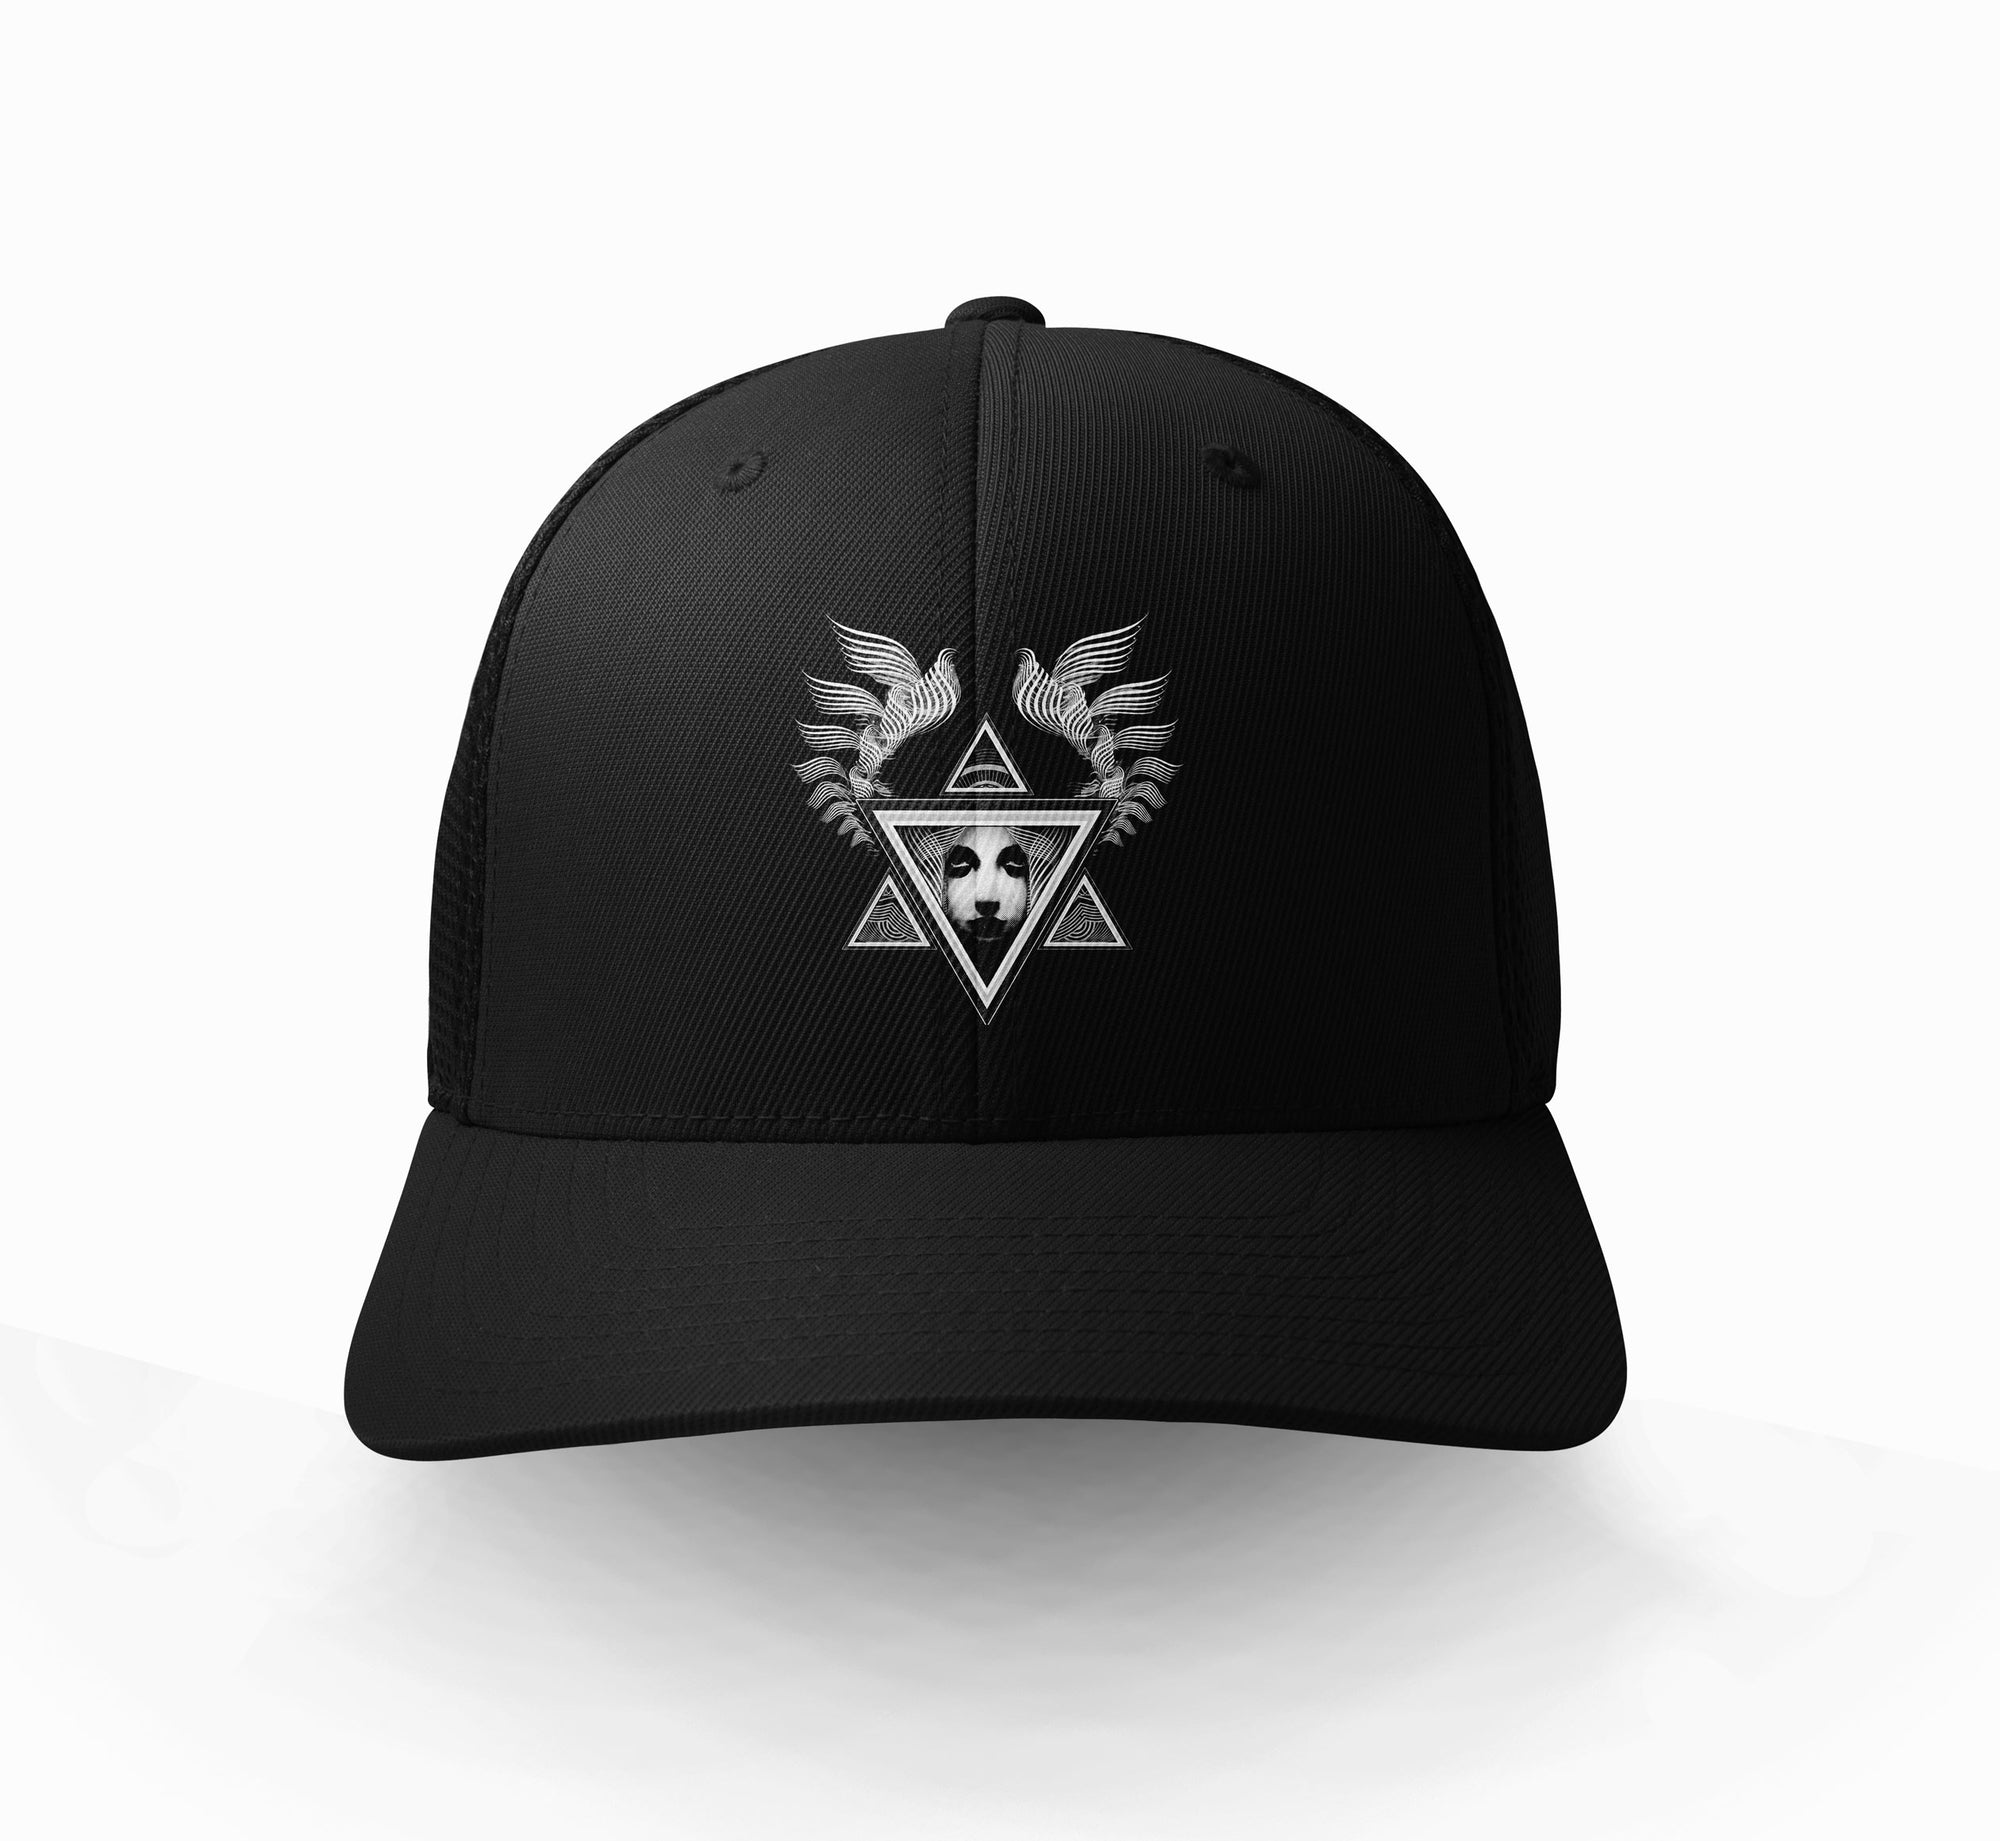 IRobot Curved Snapback Hat by Android Jones - Ships August